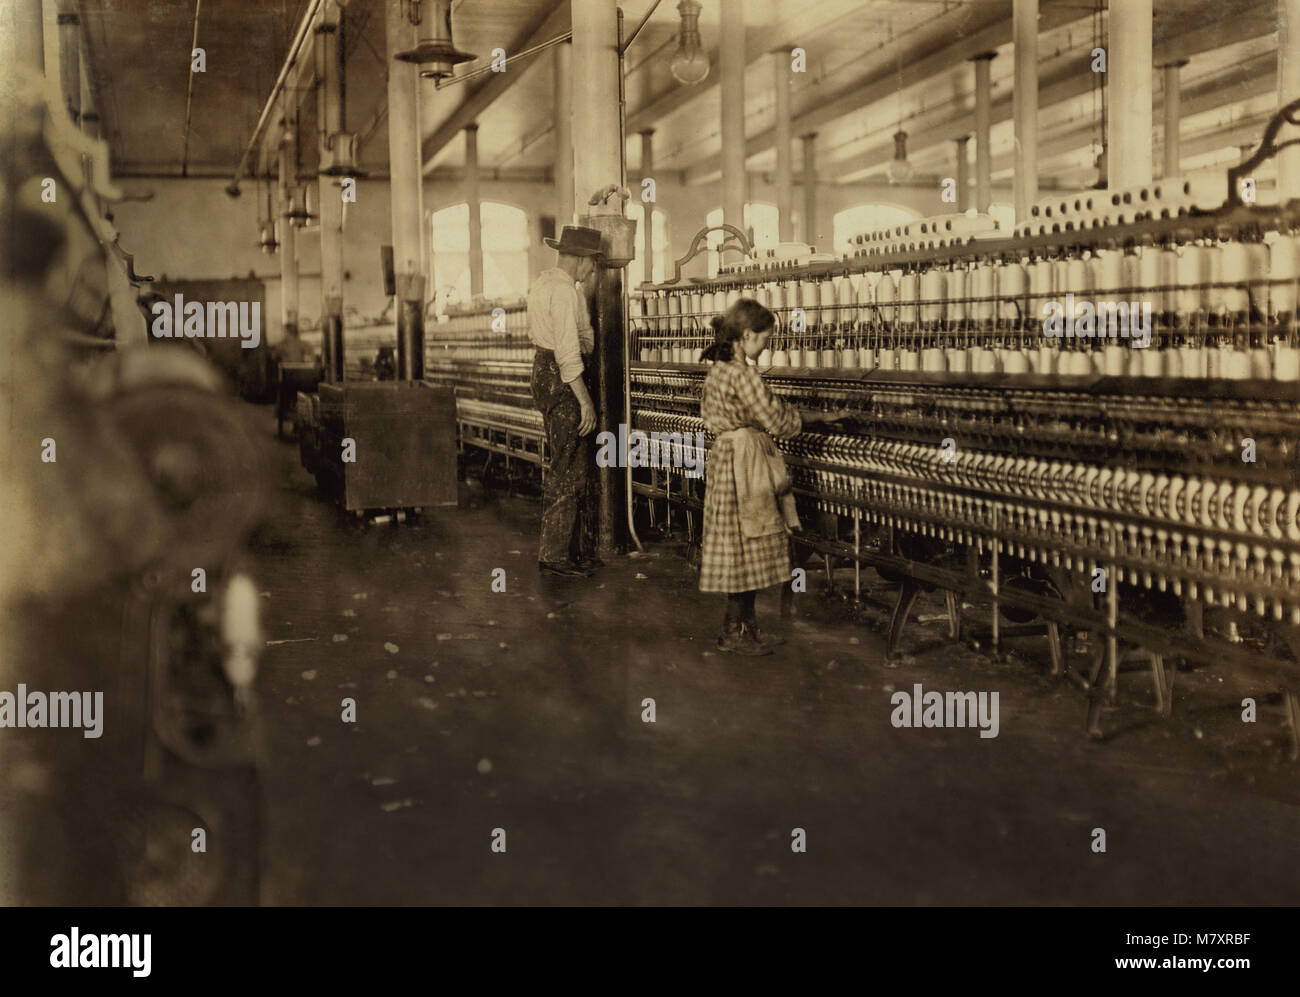 Young Cotton Mill Spinner, Lancaster, South Carolina, USA, Lewis Hine for National Child Labor Committee, November 1908 Stock Photo